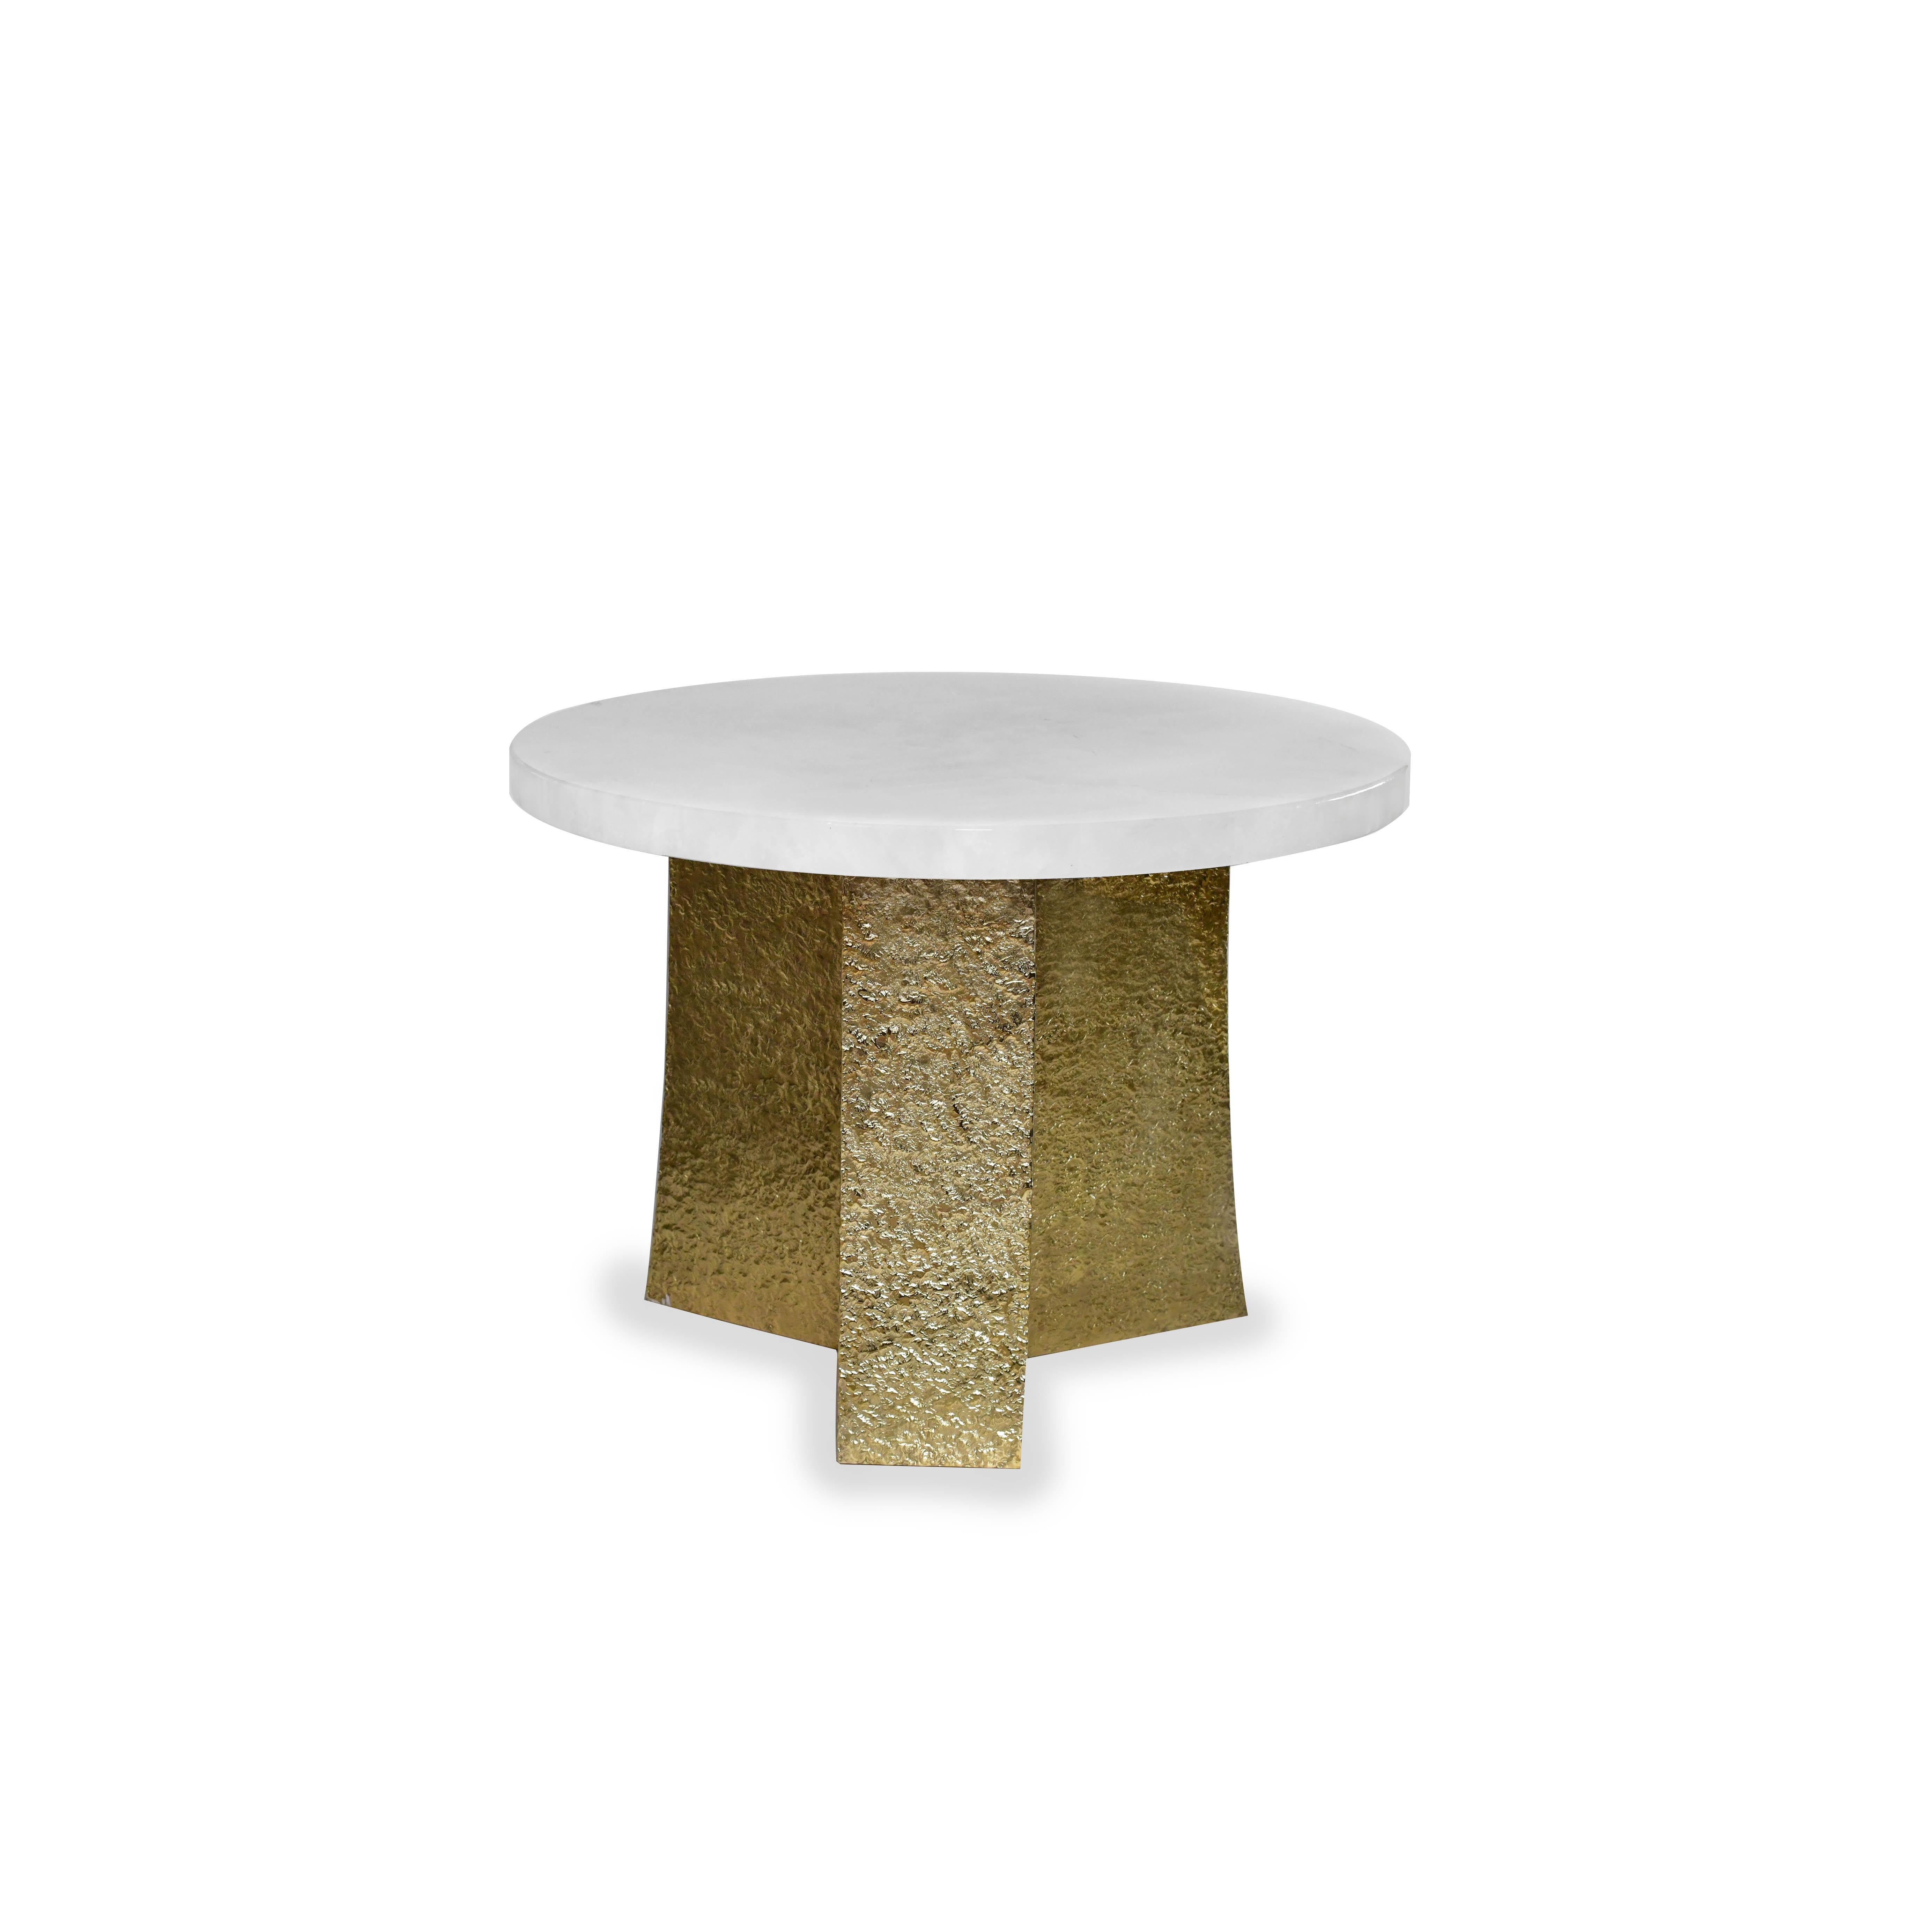 Rock crystal top cocktail table with hammered brass Stand. Created by Phoenix Gallery.
Custom size and finish upon request.